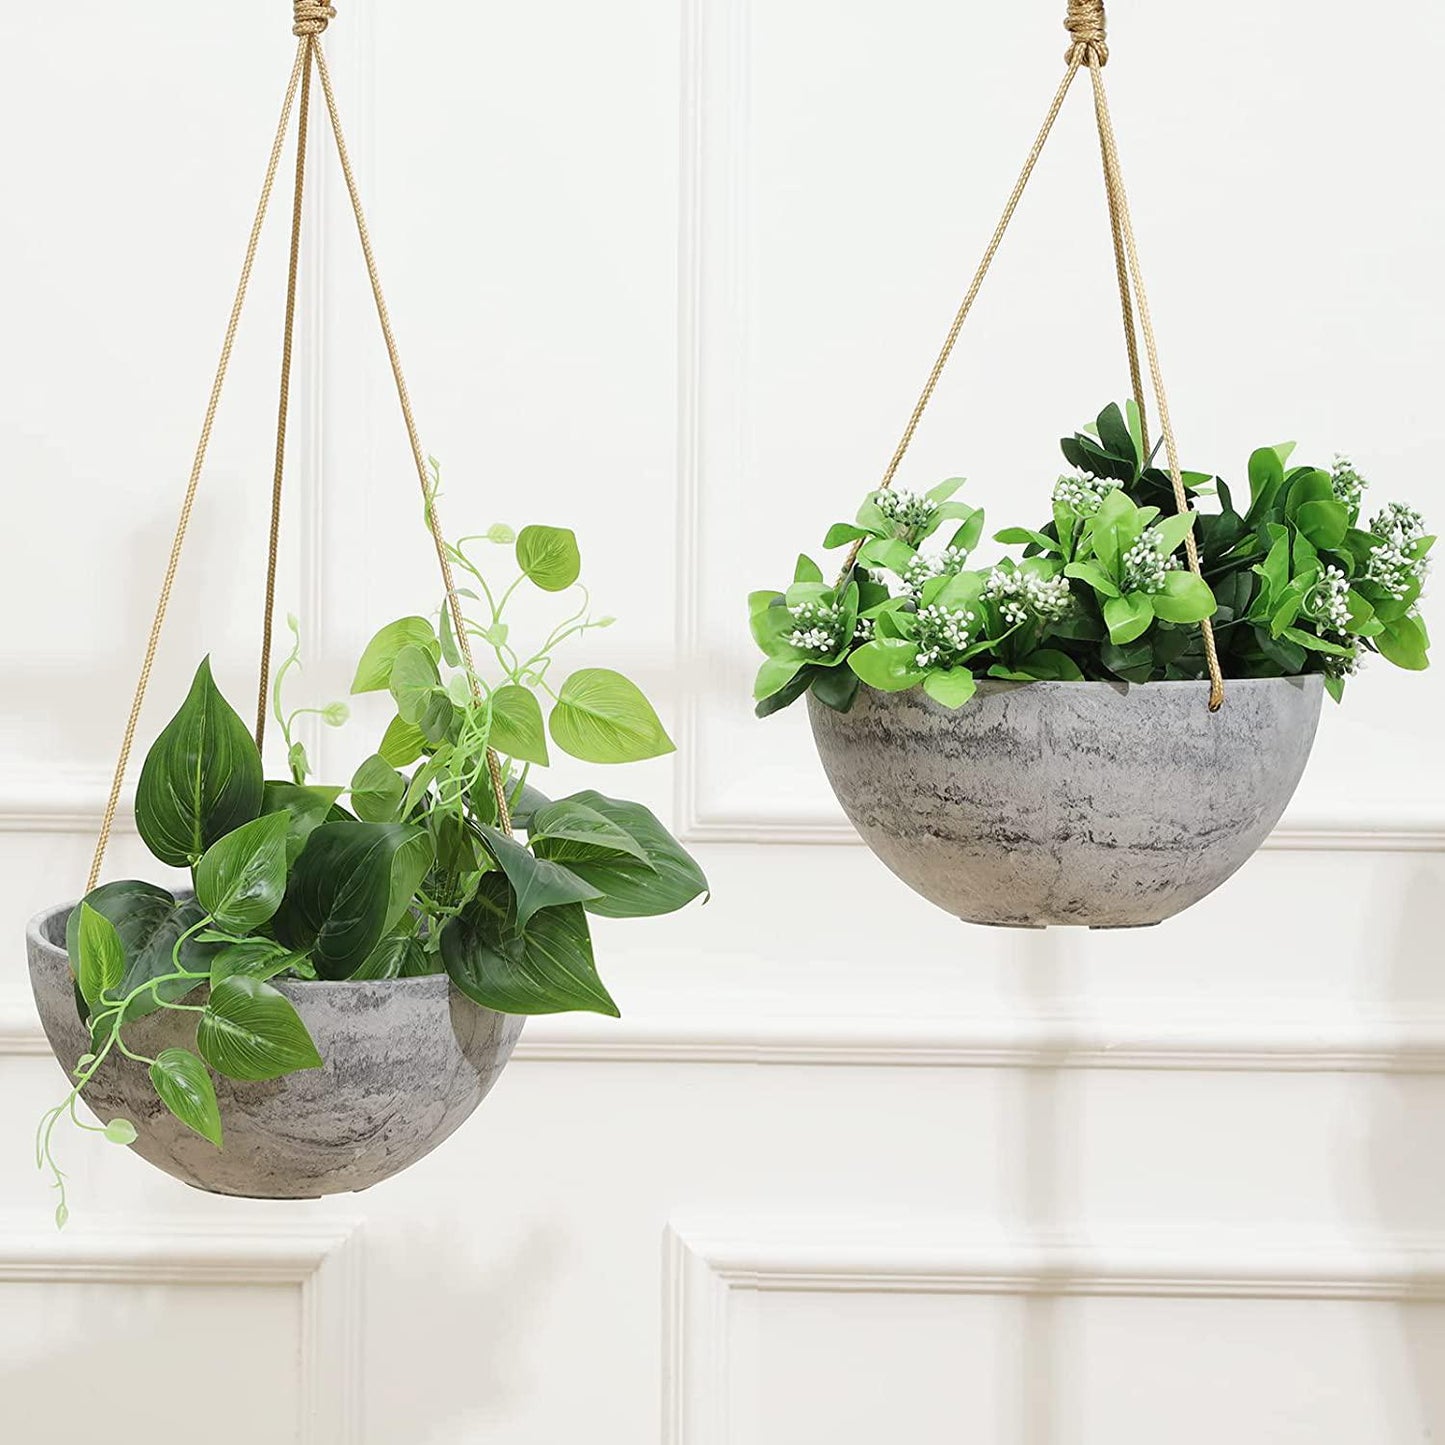 HECTOLIFE 2-Pack 10 Inch Hanging Planter Indoor Outdoor Planter Pot Plant Containers with Drainage Hole, Plant Pot for Hanging Plants,Hanging Flower Pot (Grey)